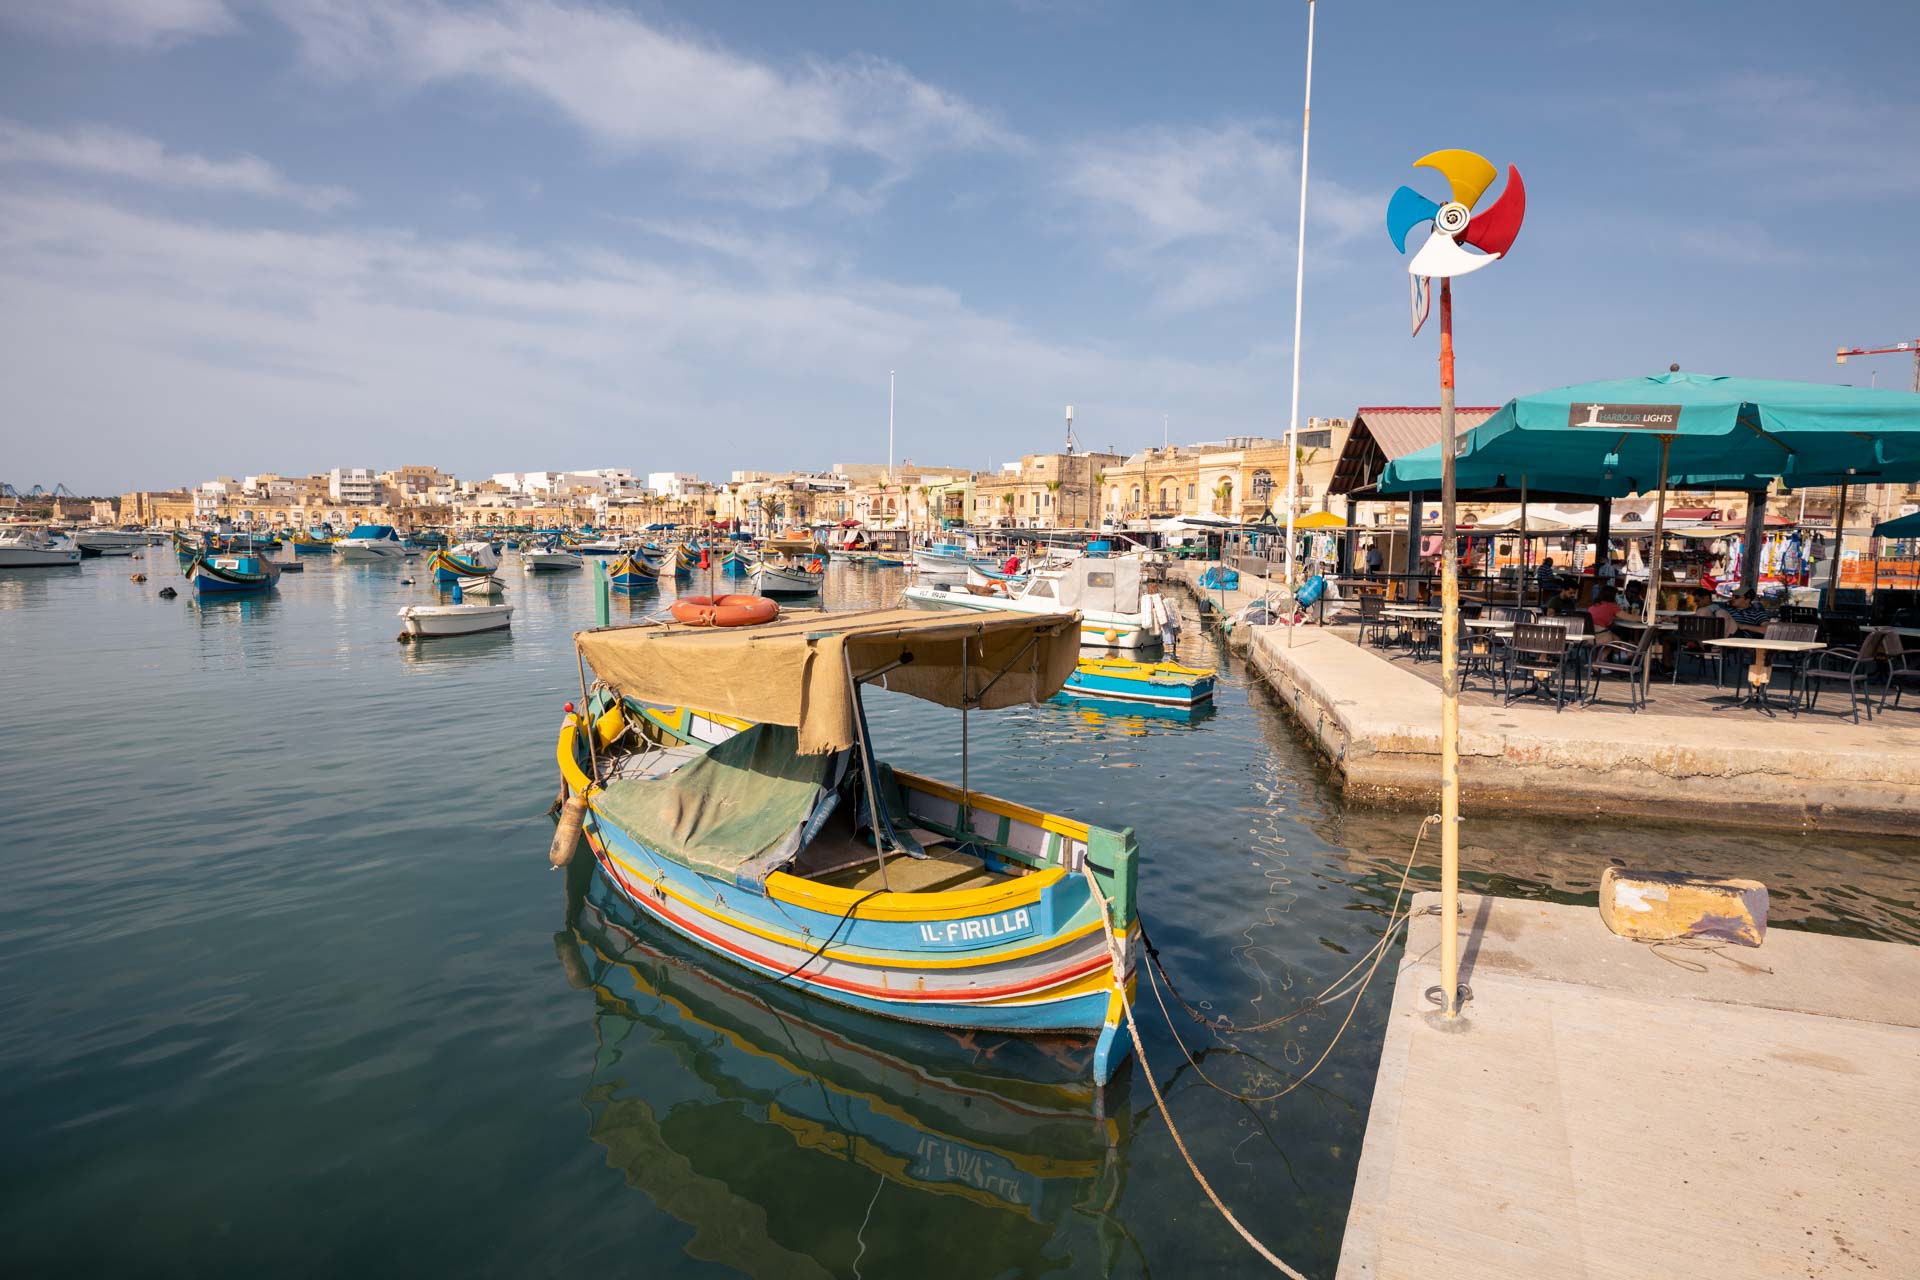 things to do in malta, places to visit in Malta, things to do on Malta, malta attractions, malta tourist attractions, best places to visit in malta, activities in malta, things to do in marsaxlokk, things to do in marsaxlokk malta, what to do in marsaxlokk